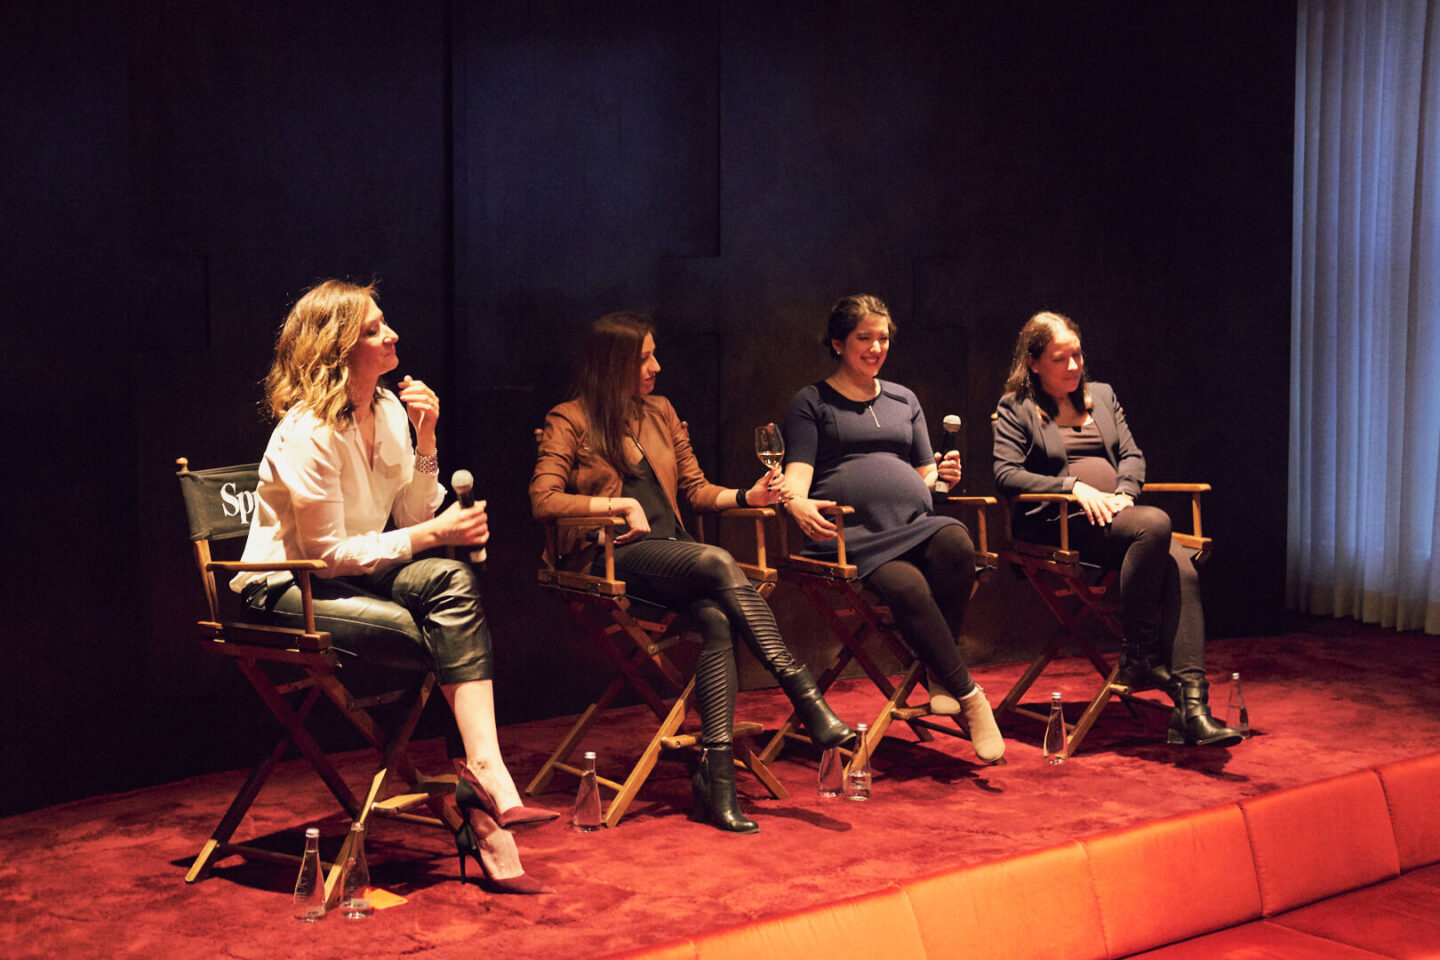 Ellevate Network - Spring Place, NY, New York - Event Photography - Networking Events - Panel Discussions